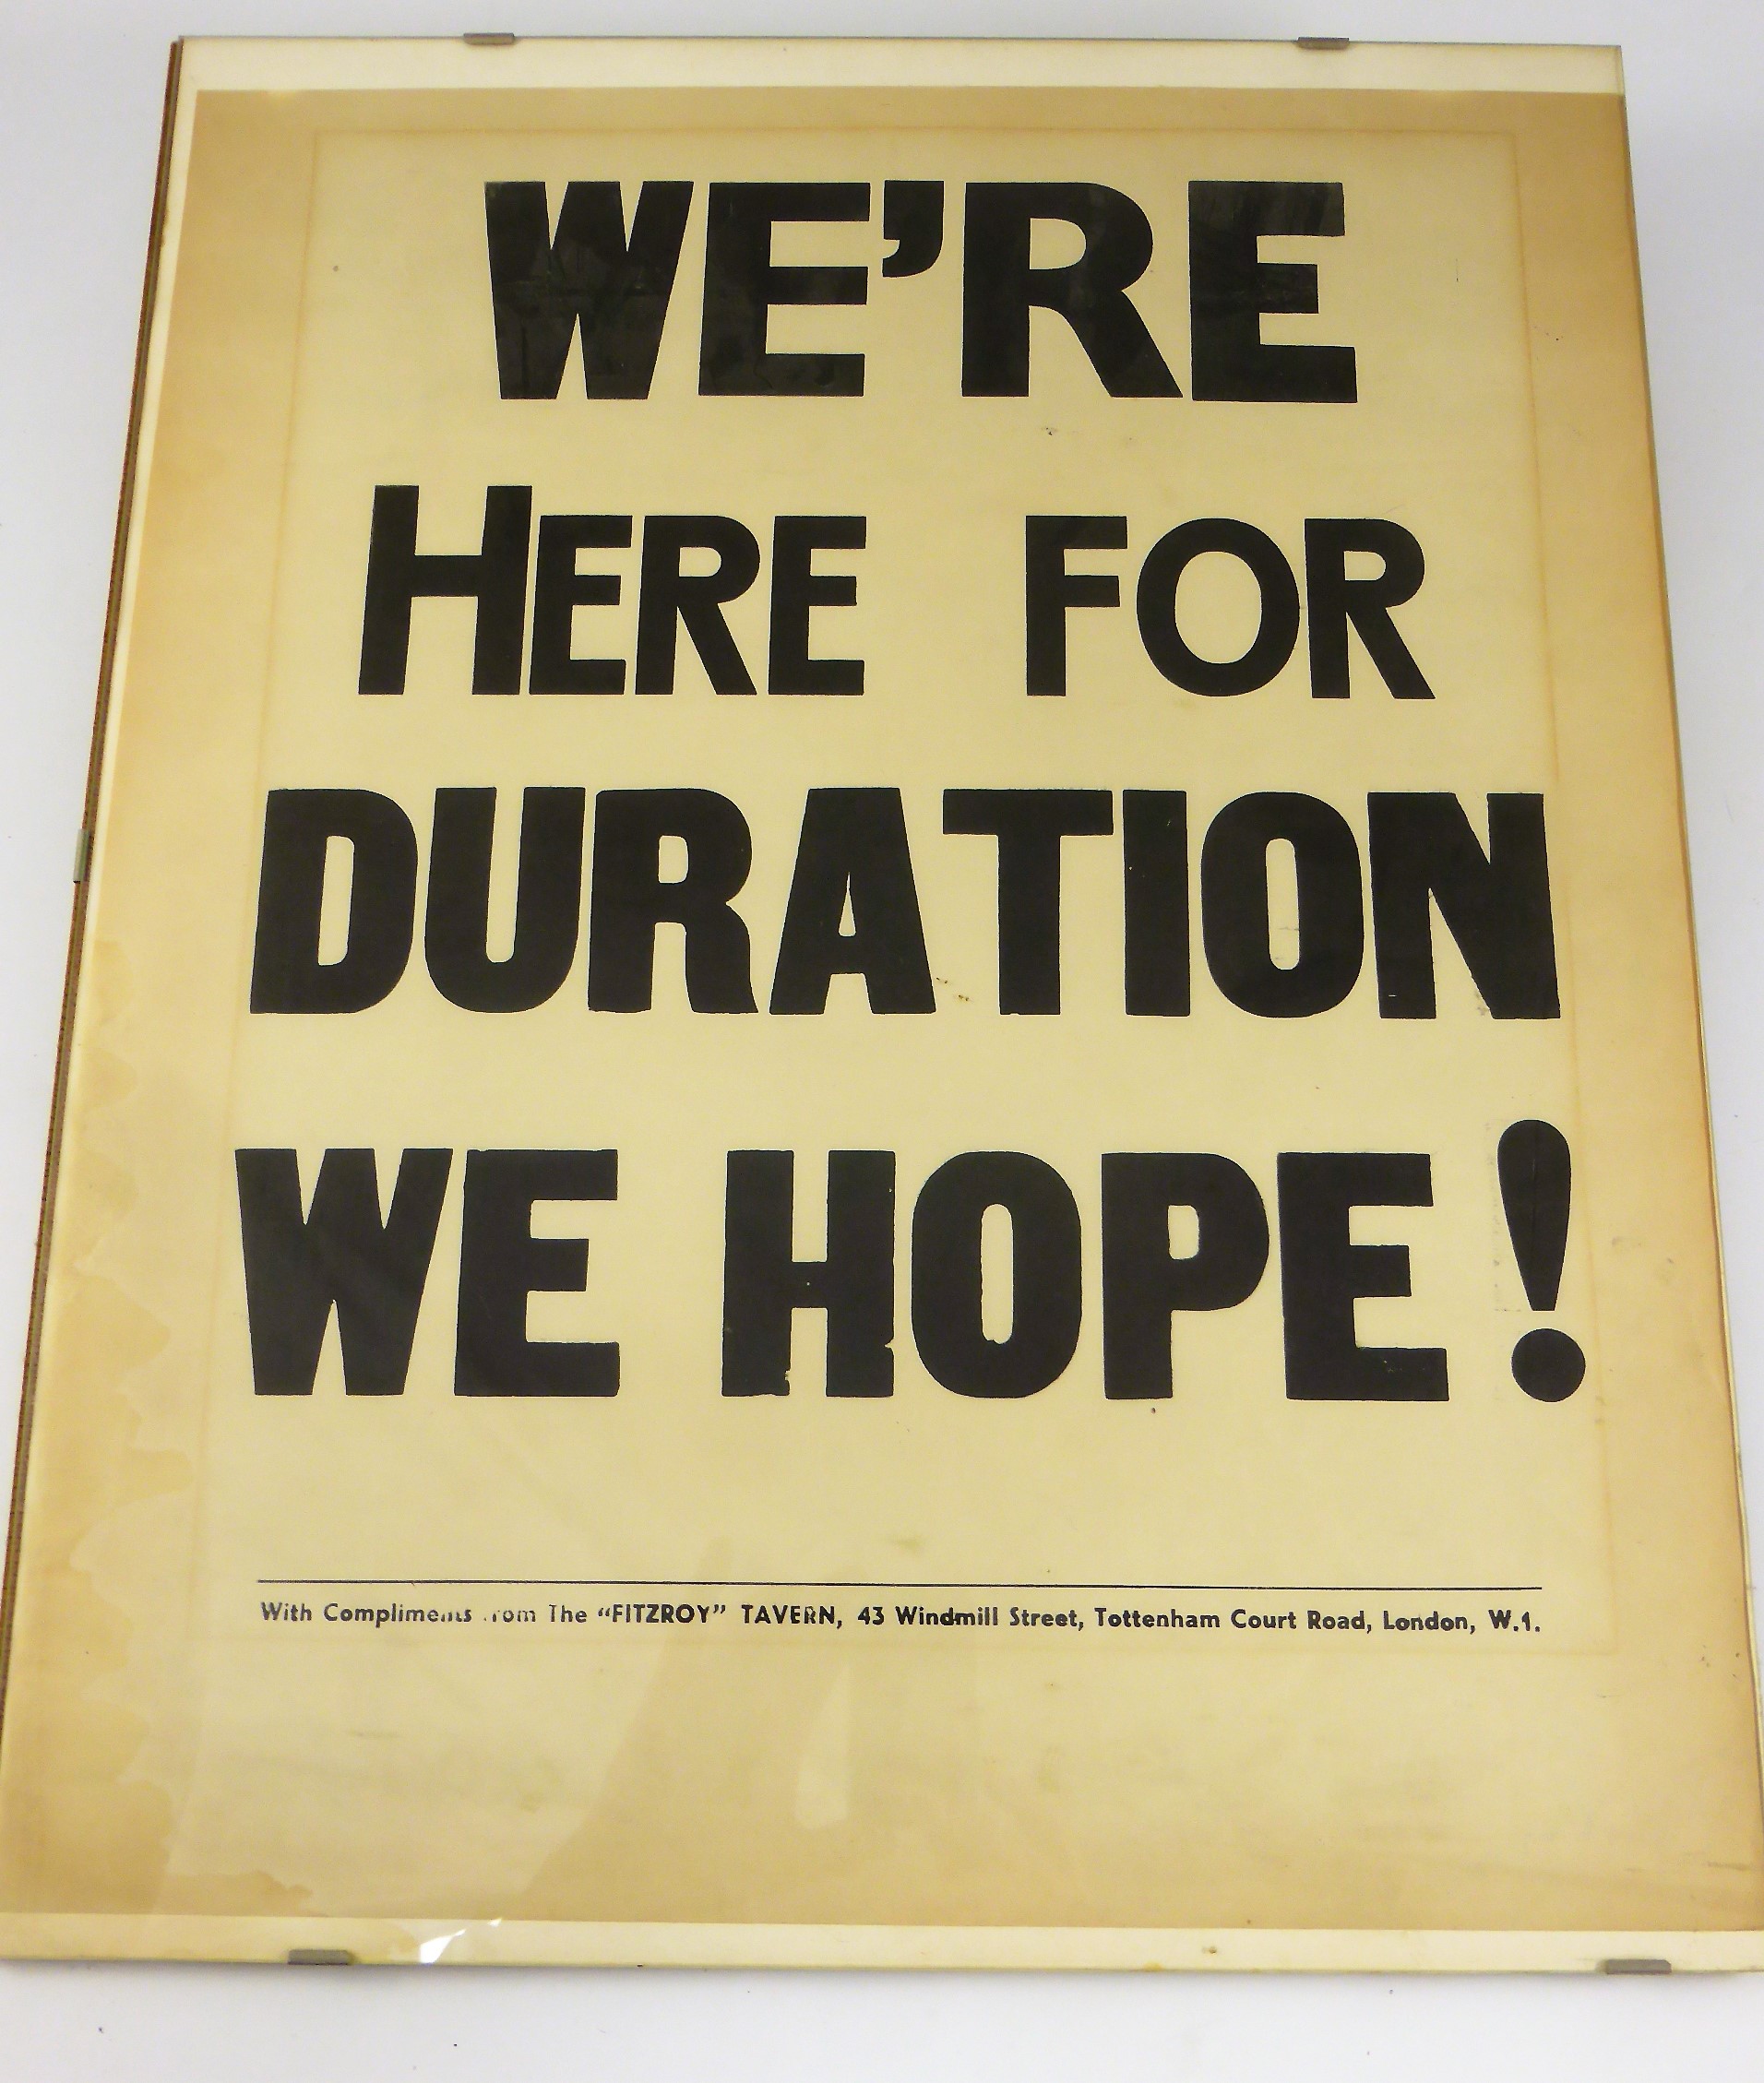 POSSIBLY WARTIME ERA POSTER 'WE ARE HERE FOR THE DURATION WE HOPE' FITZROY TAVERN, 43 WINDMILL